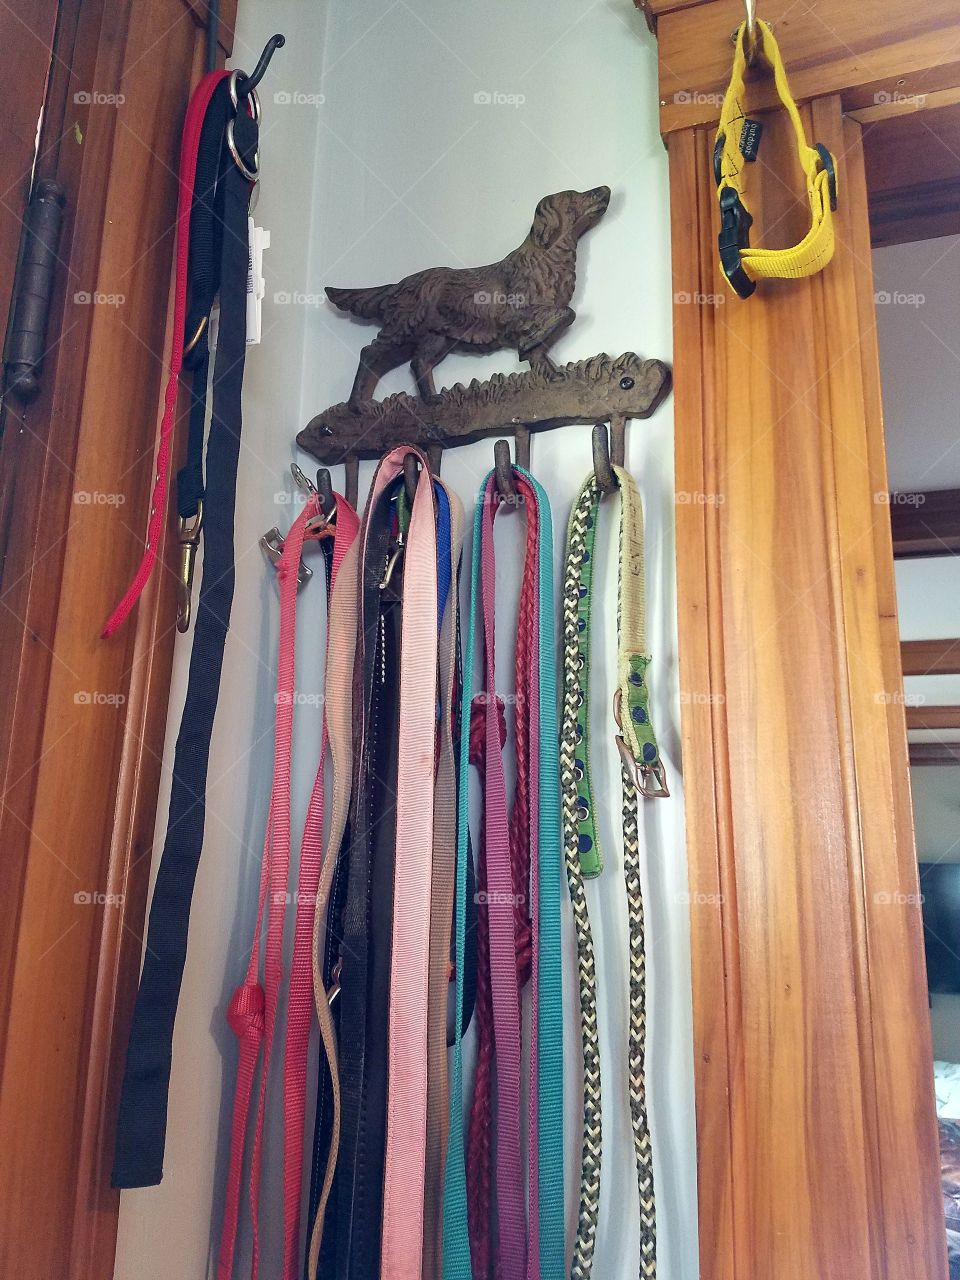 Old metal dog hooks for hanging leashes on, this one holds the many leashes needed for the dogs living in this home, all different colors & sized collars.